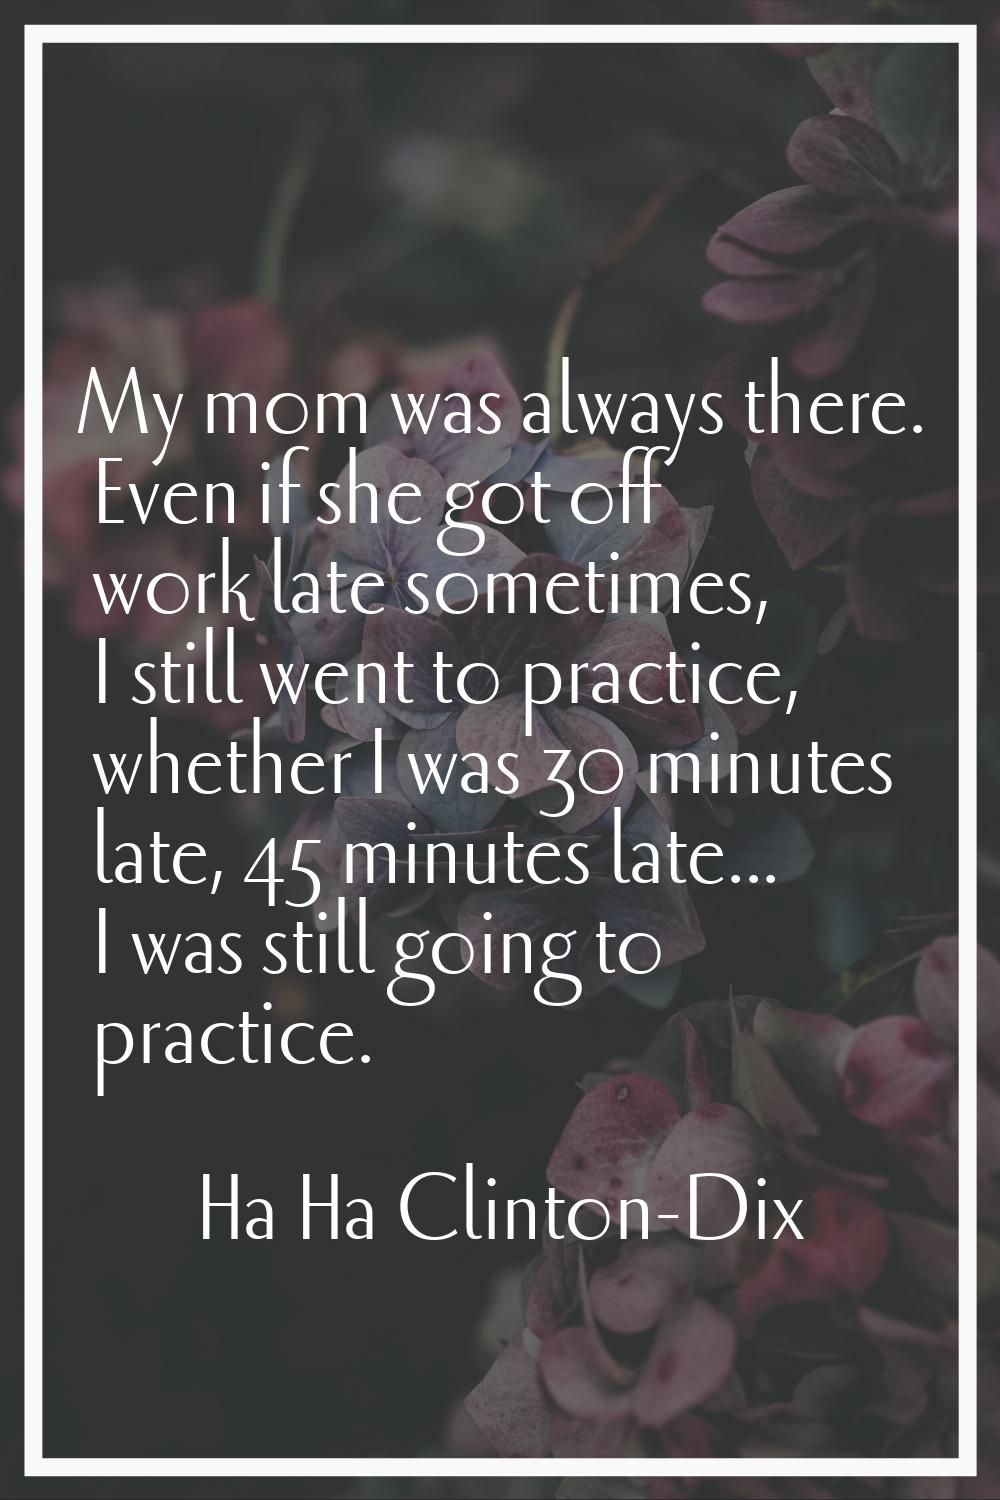 My mom was always there. Even if she got off work late sometimes, I still went to practice, whether